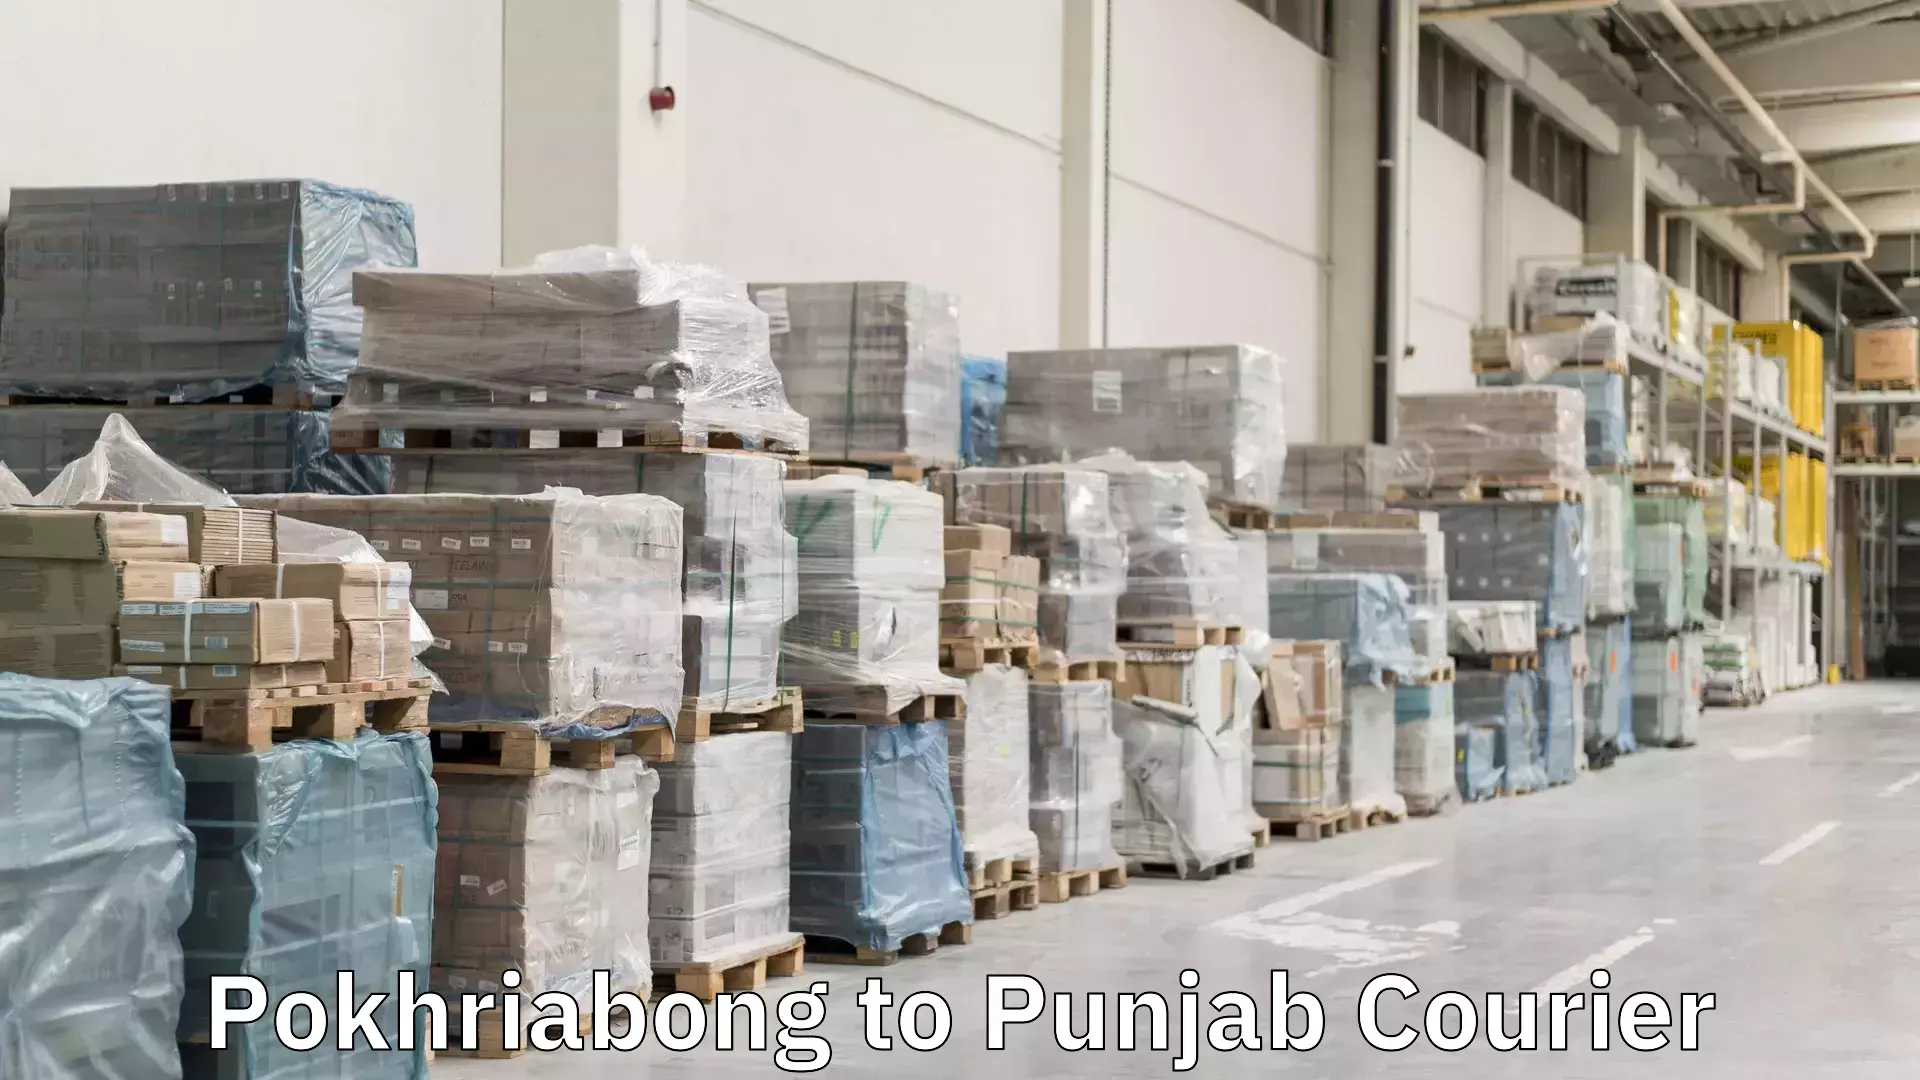 Professional courier handling Pokhriabong to Punjab